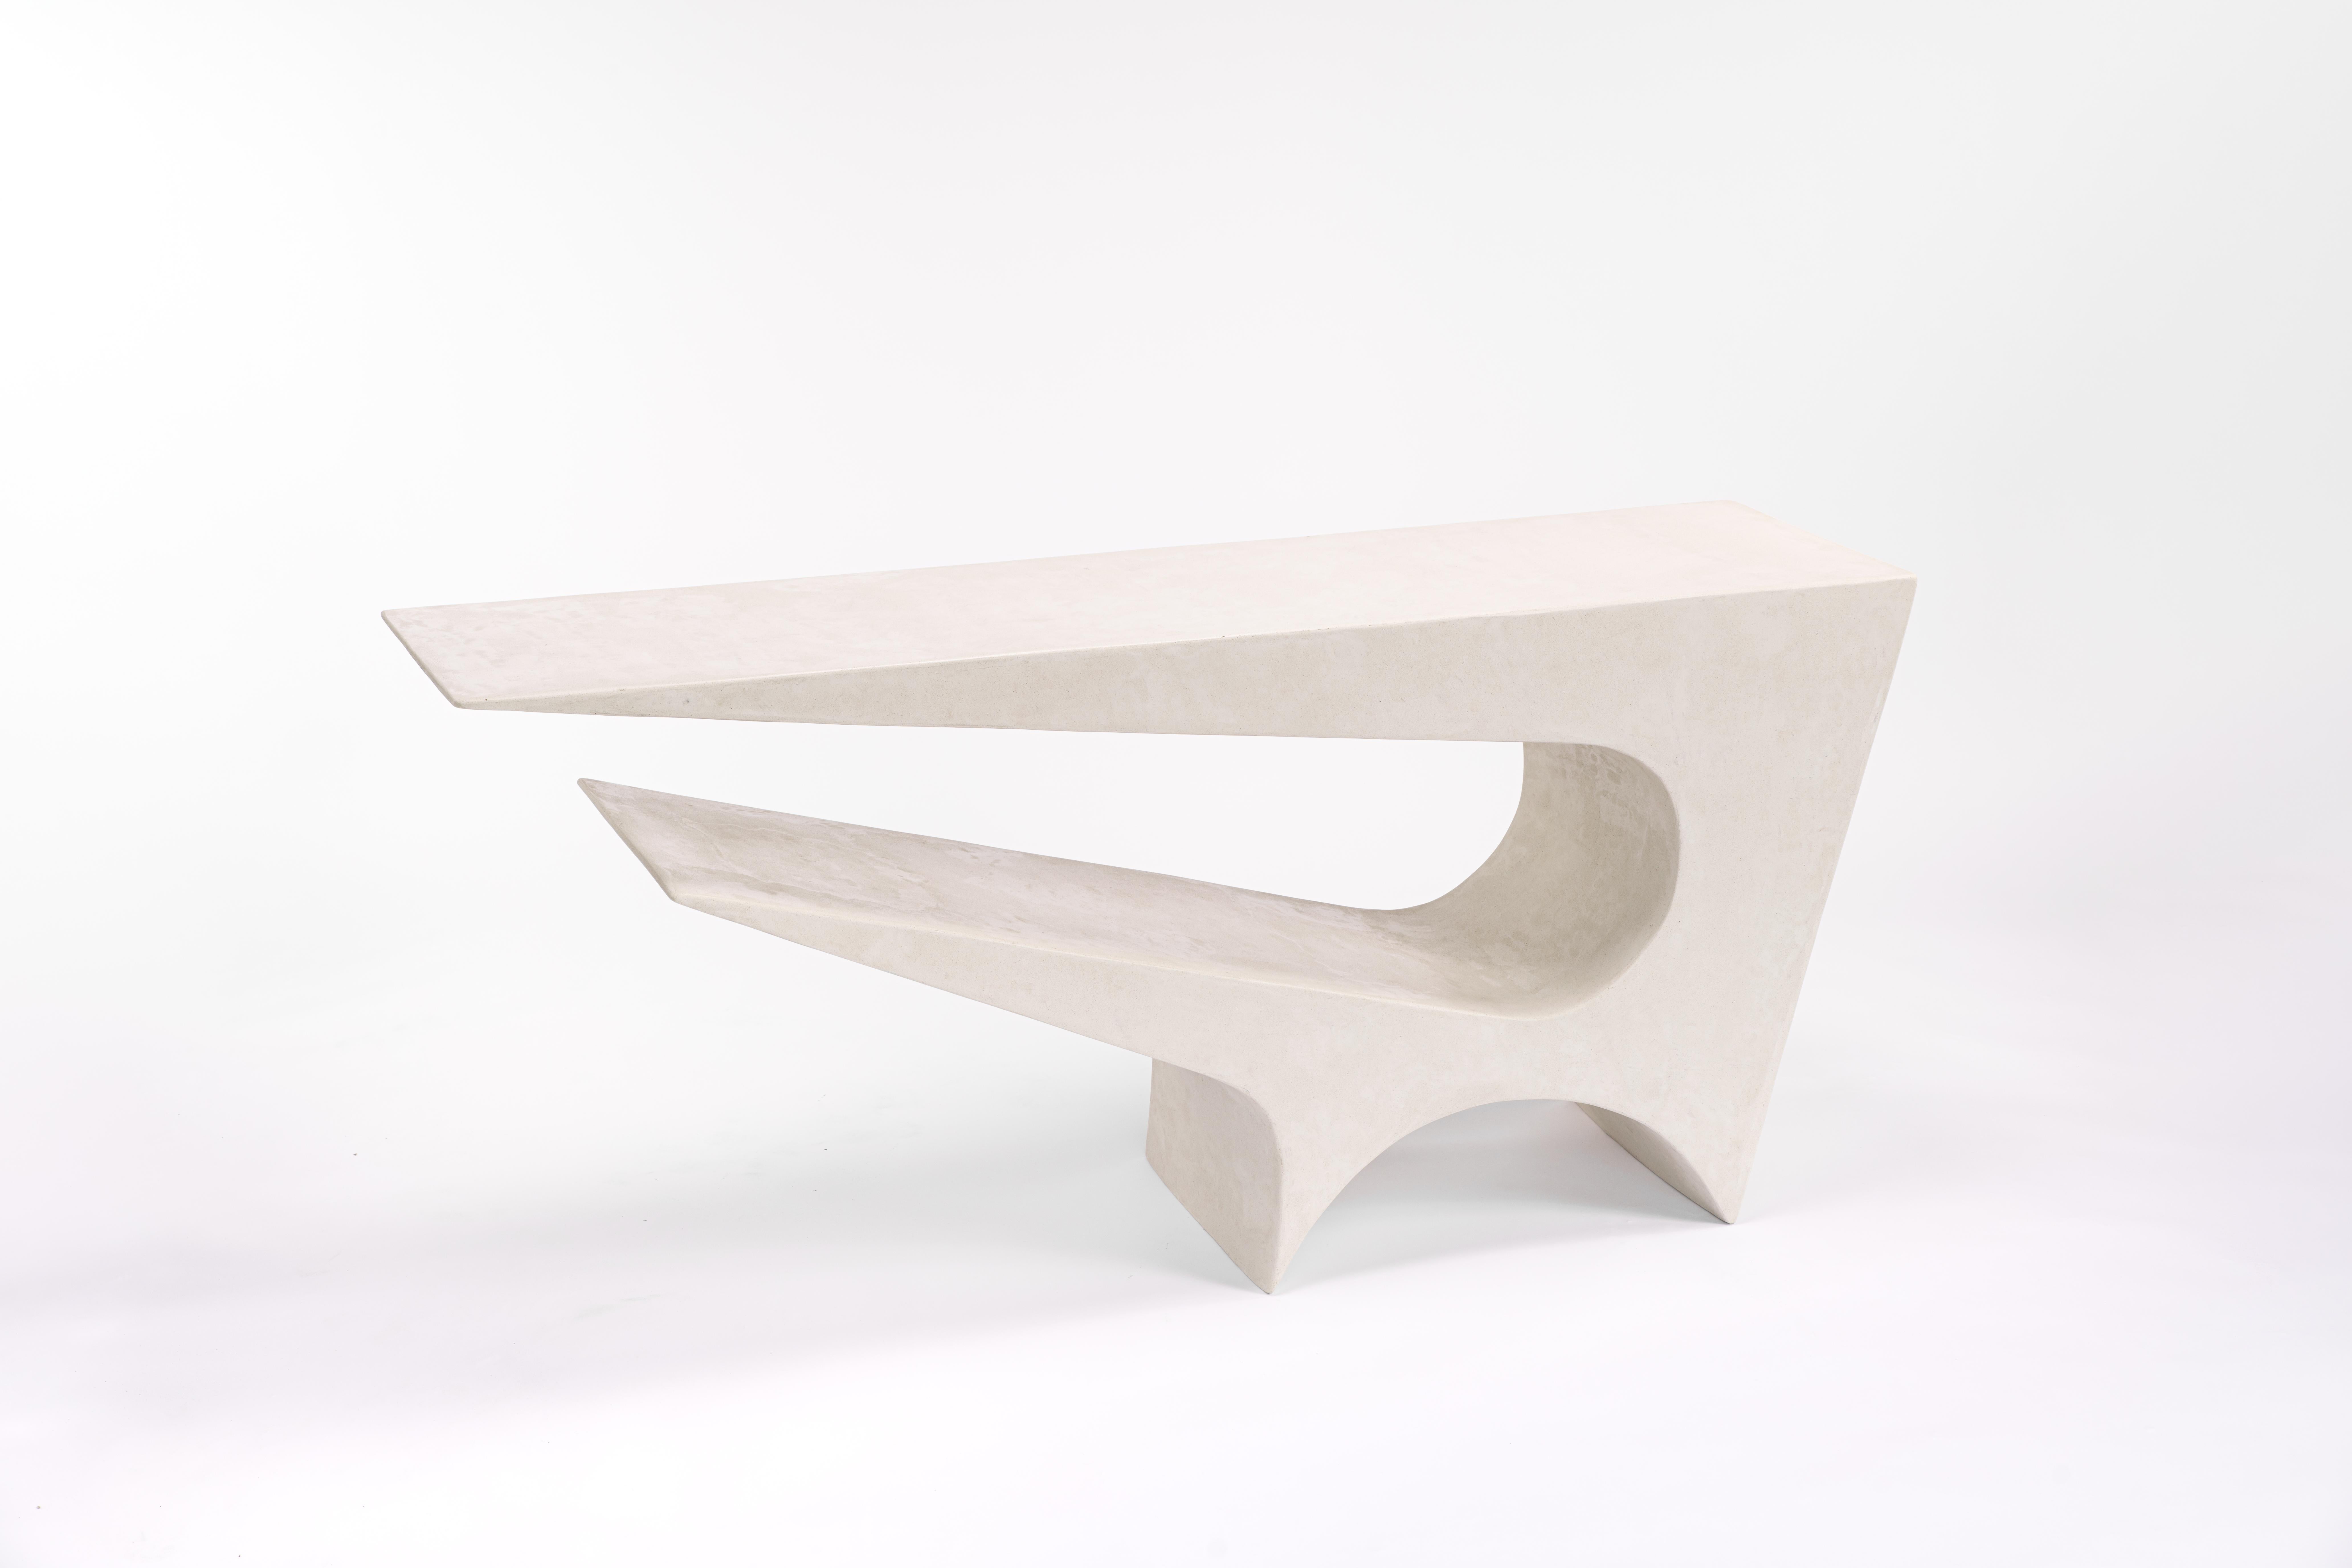 Contemporary Star Axis Console Table in Polished Concrete by Neal Aronowitz For Sale